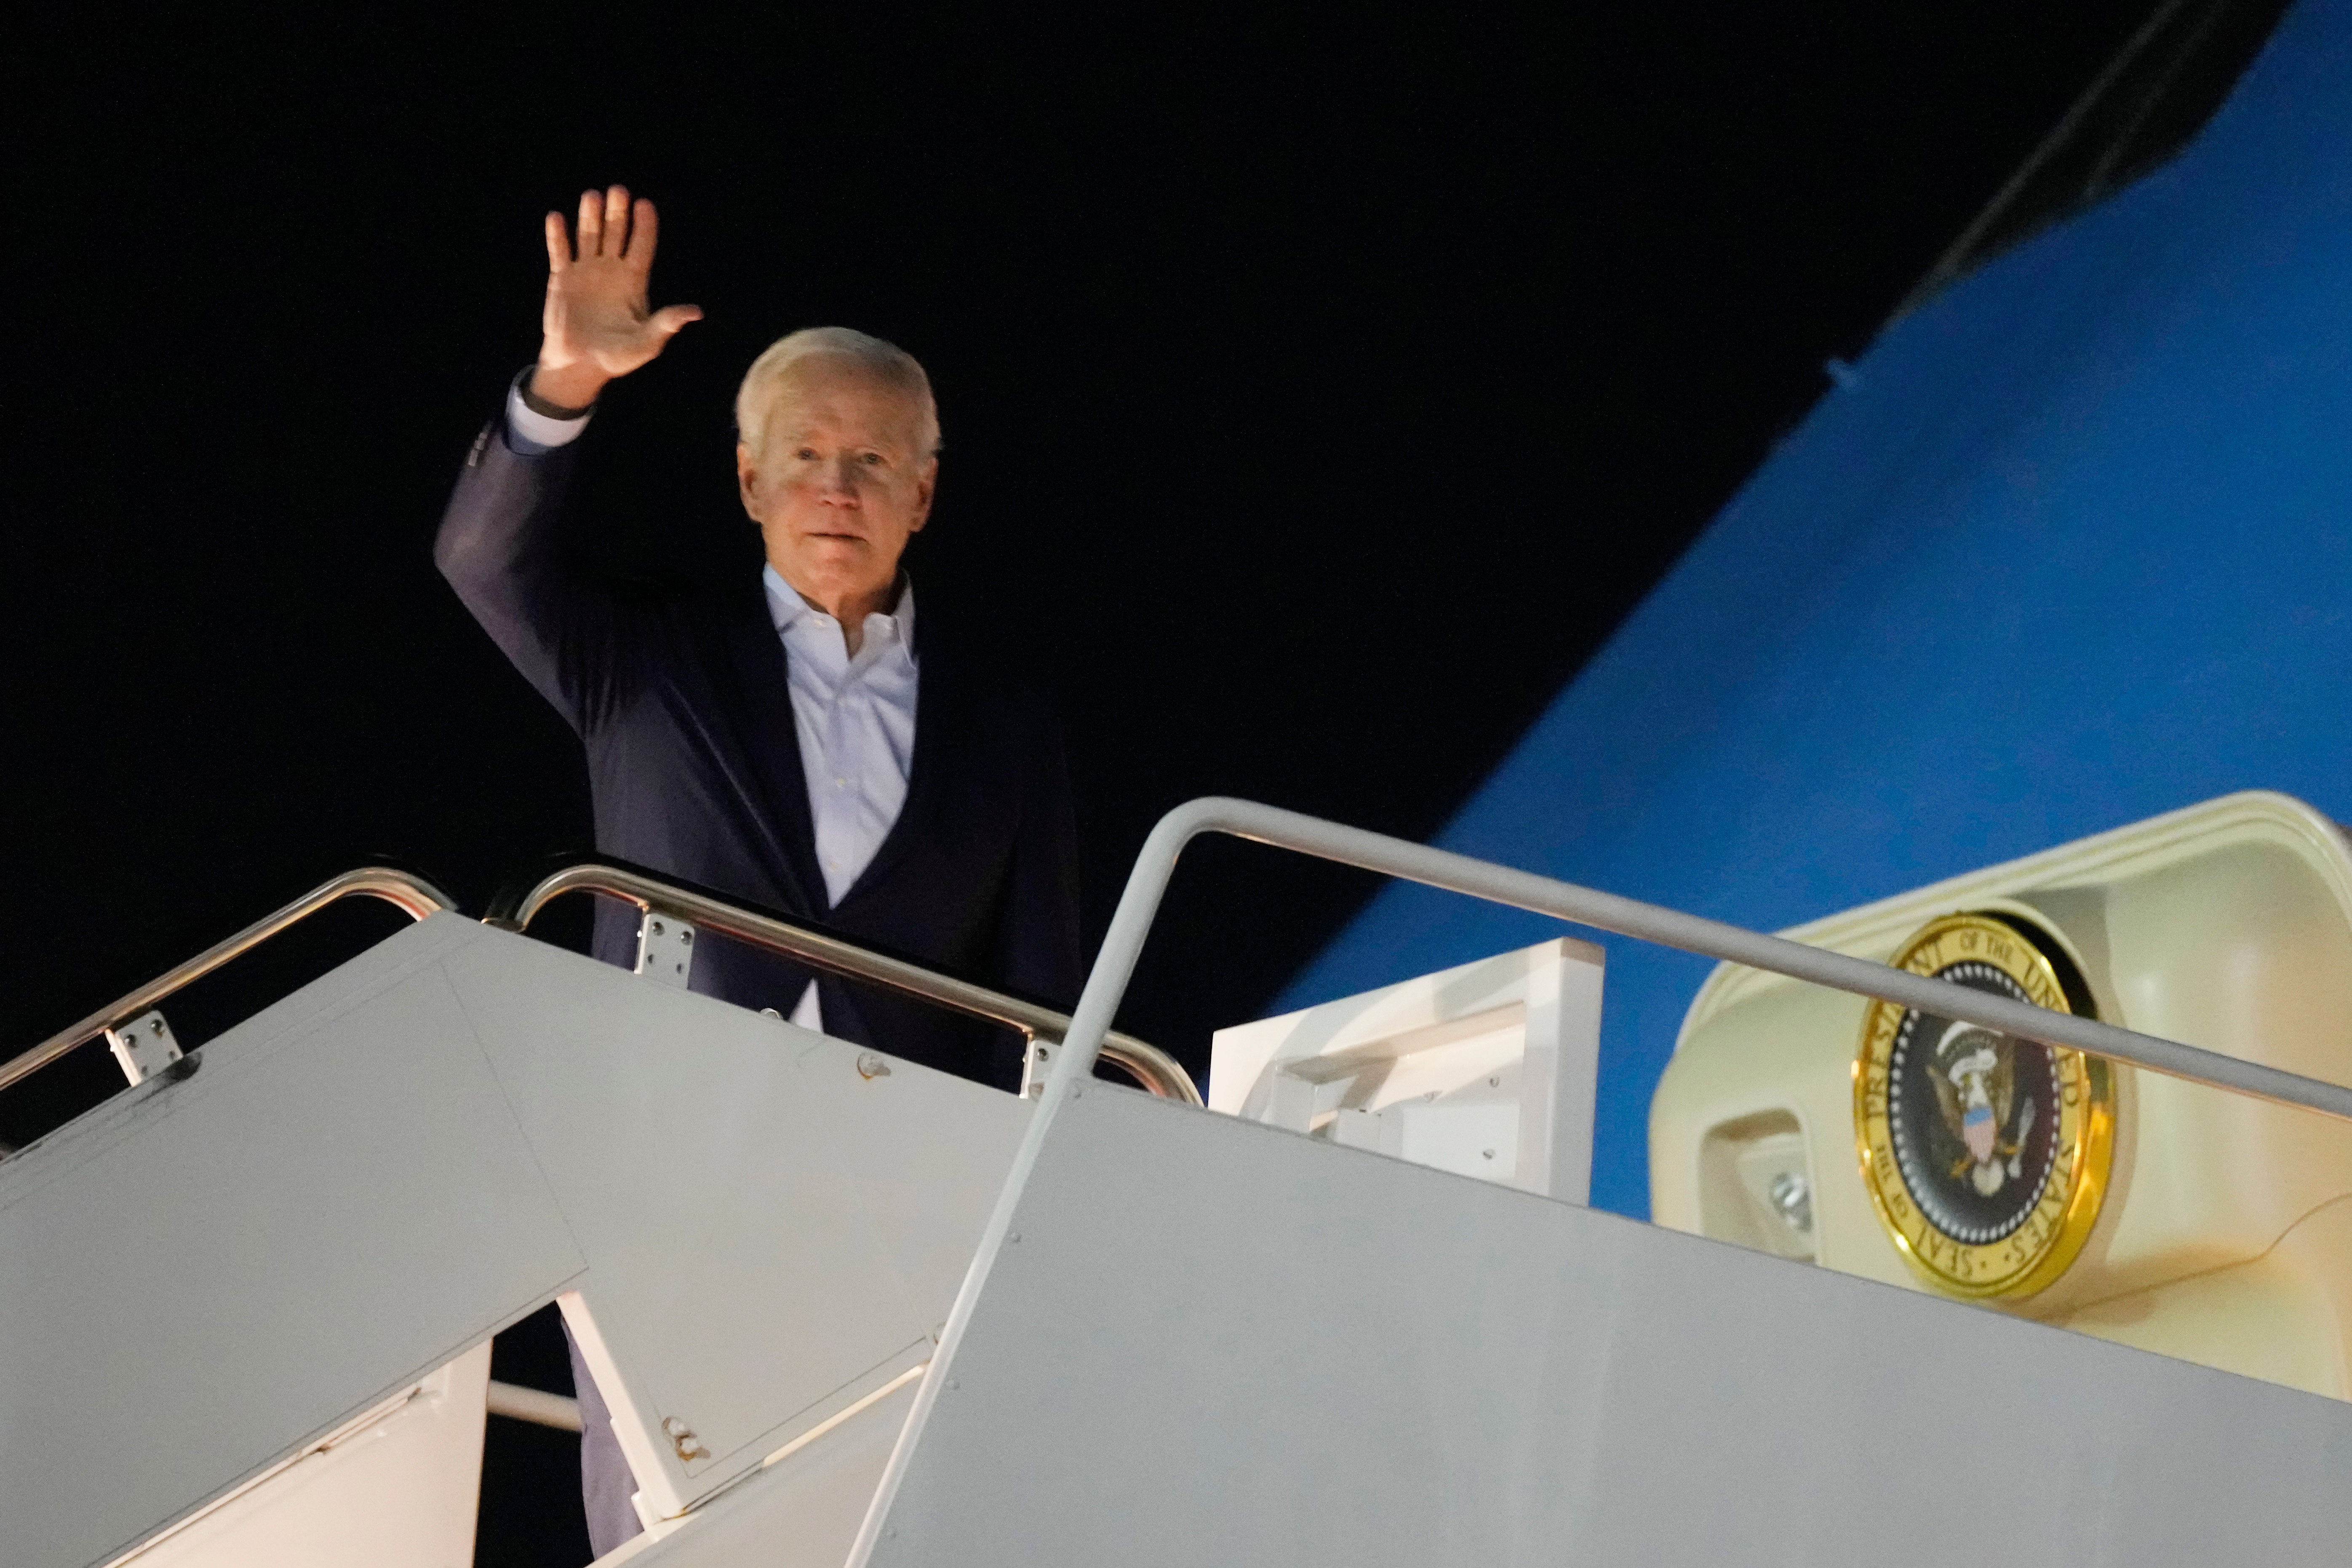 Biden vacations in Virgin Islands as Americans face problems at home